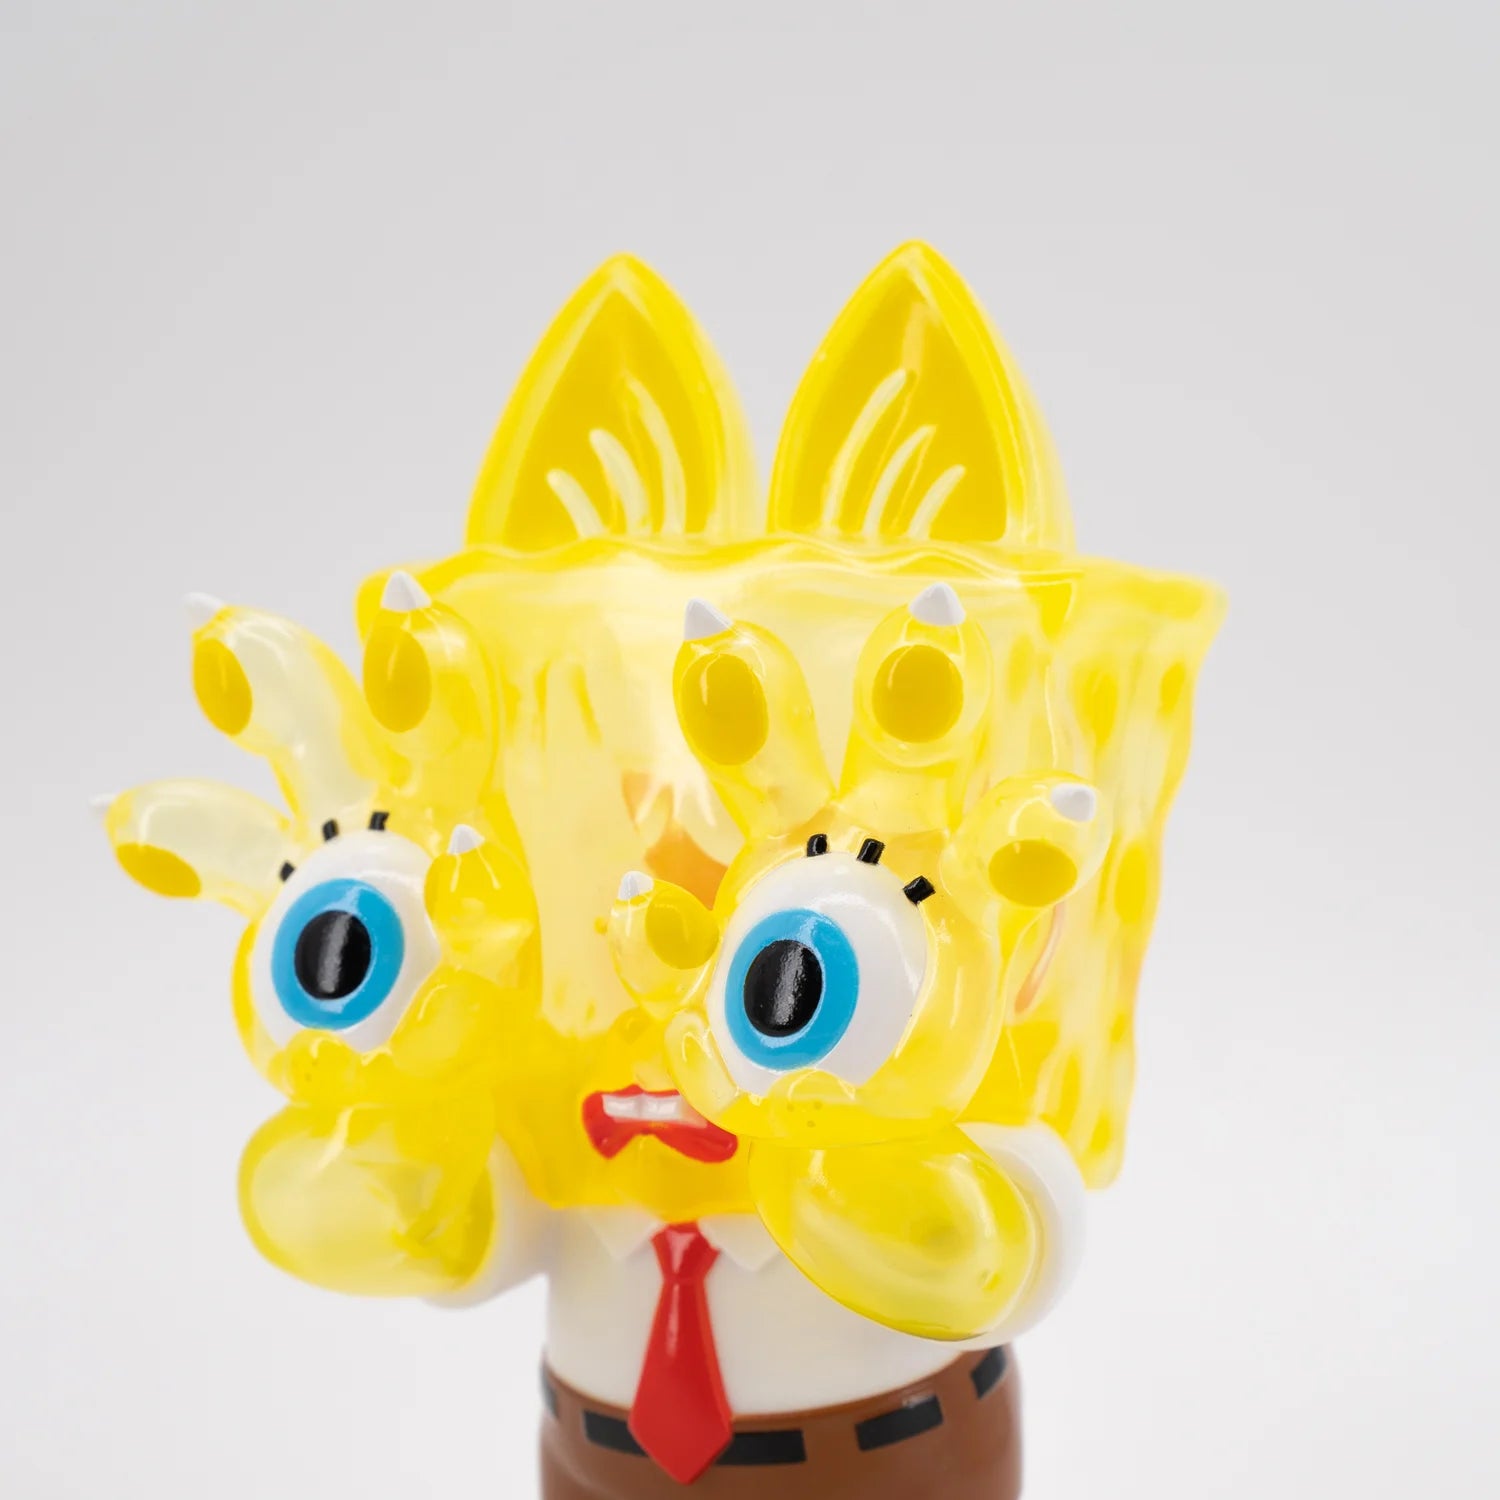 SPONGEBOB HELL'S CAT TRANSLUCENT SPECIAL EDITION by Grape Brain